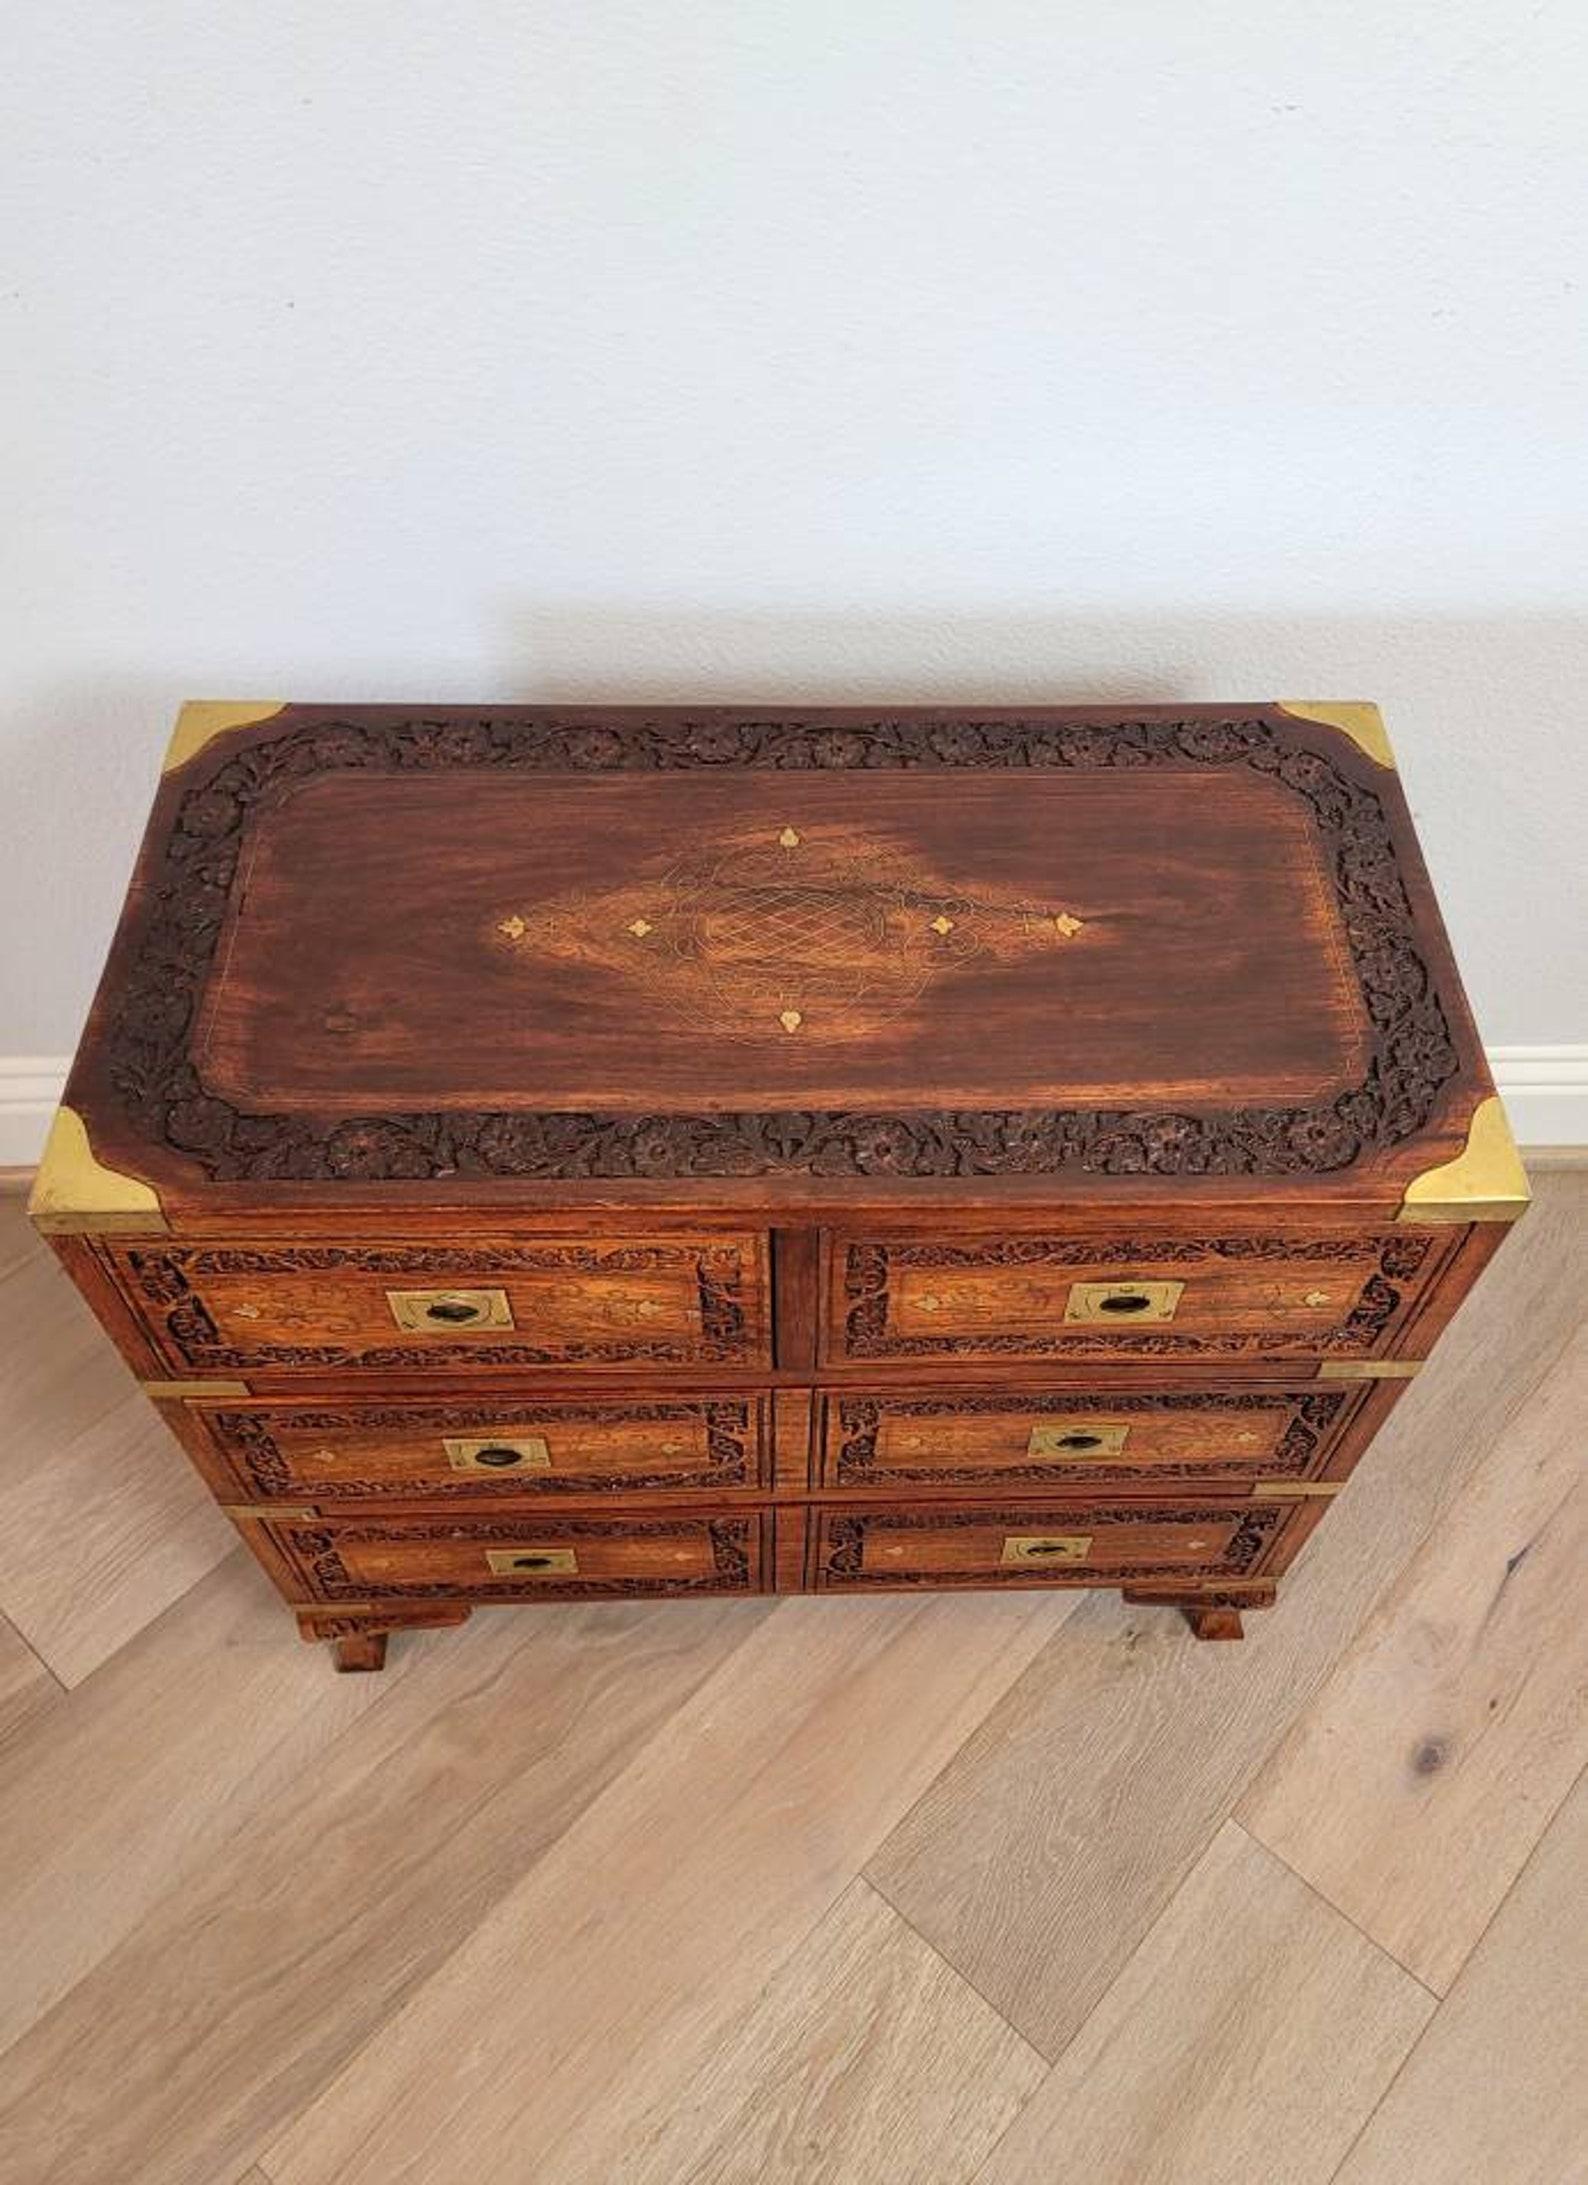 A stunning vintage Anglo-Indian intricately carved and inlaid brass-bound rosewood diminutive chest. 

Born in Pakistan in the mid-20th century, exquisitely finished in English Campaign style, finely hand-crafted of warm, rich, beautifully grained